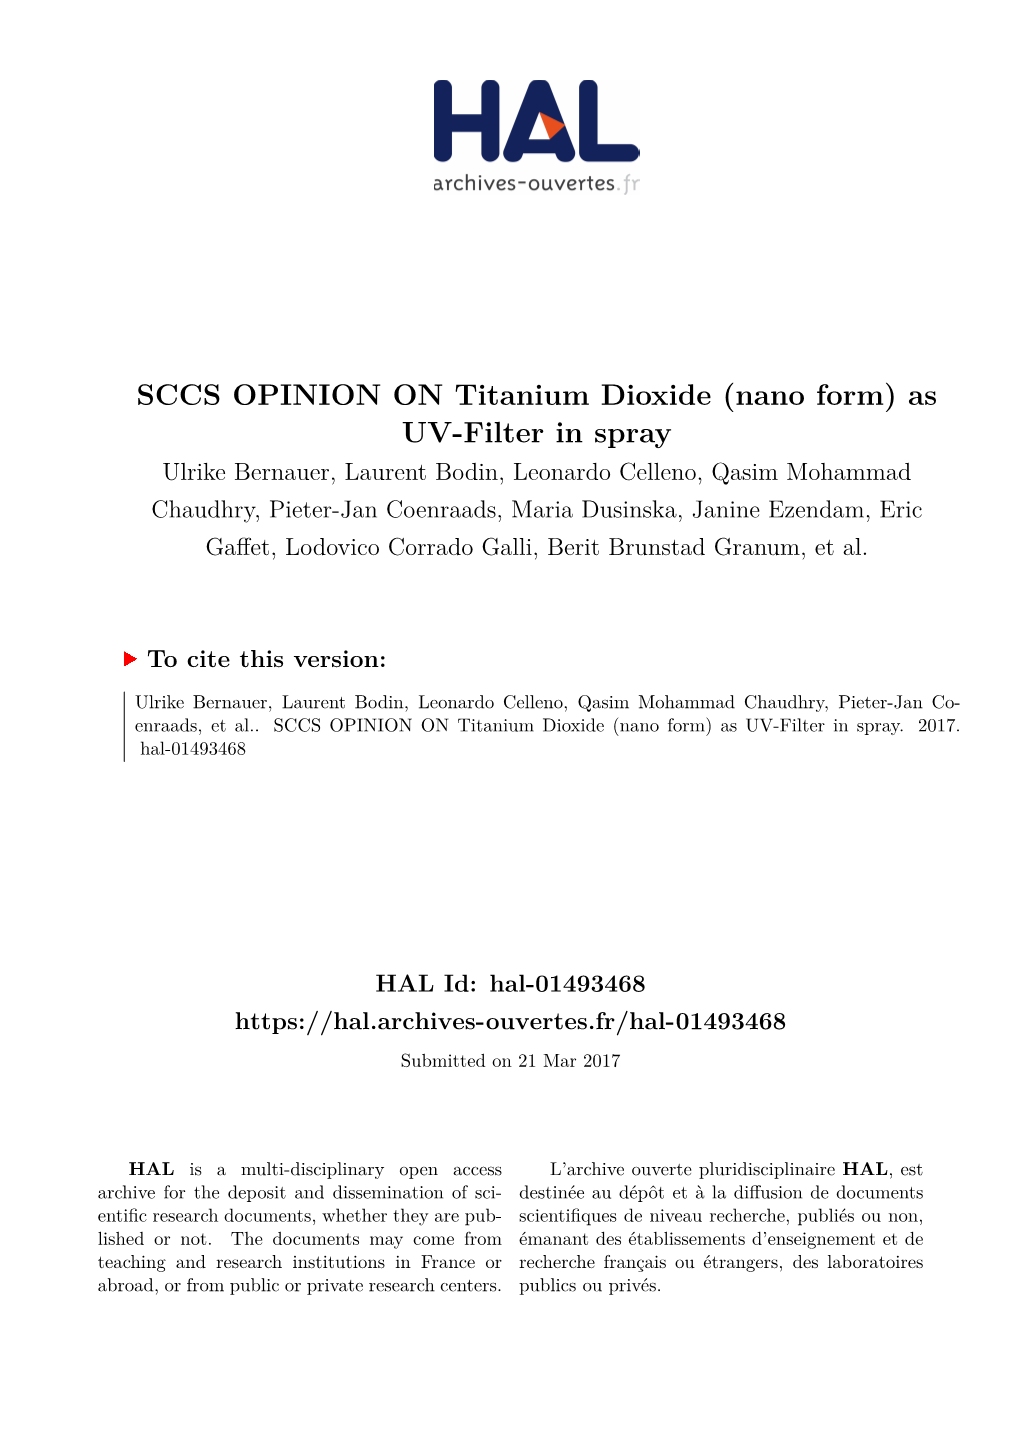 SCCS OPINION on Titanium Dioxide (Nano Form) As UV-Filter in Spray